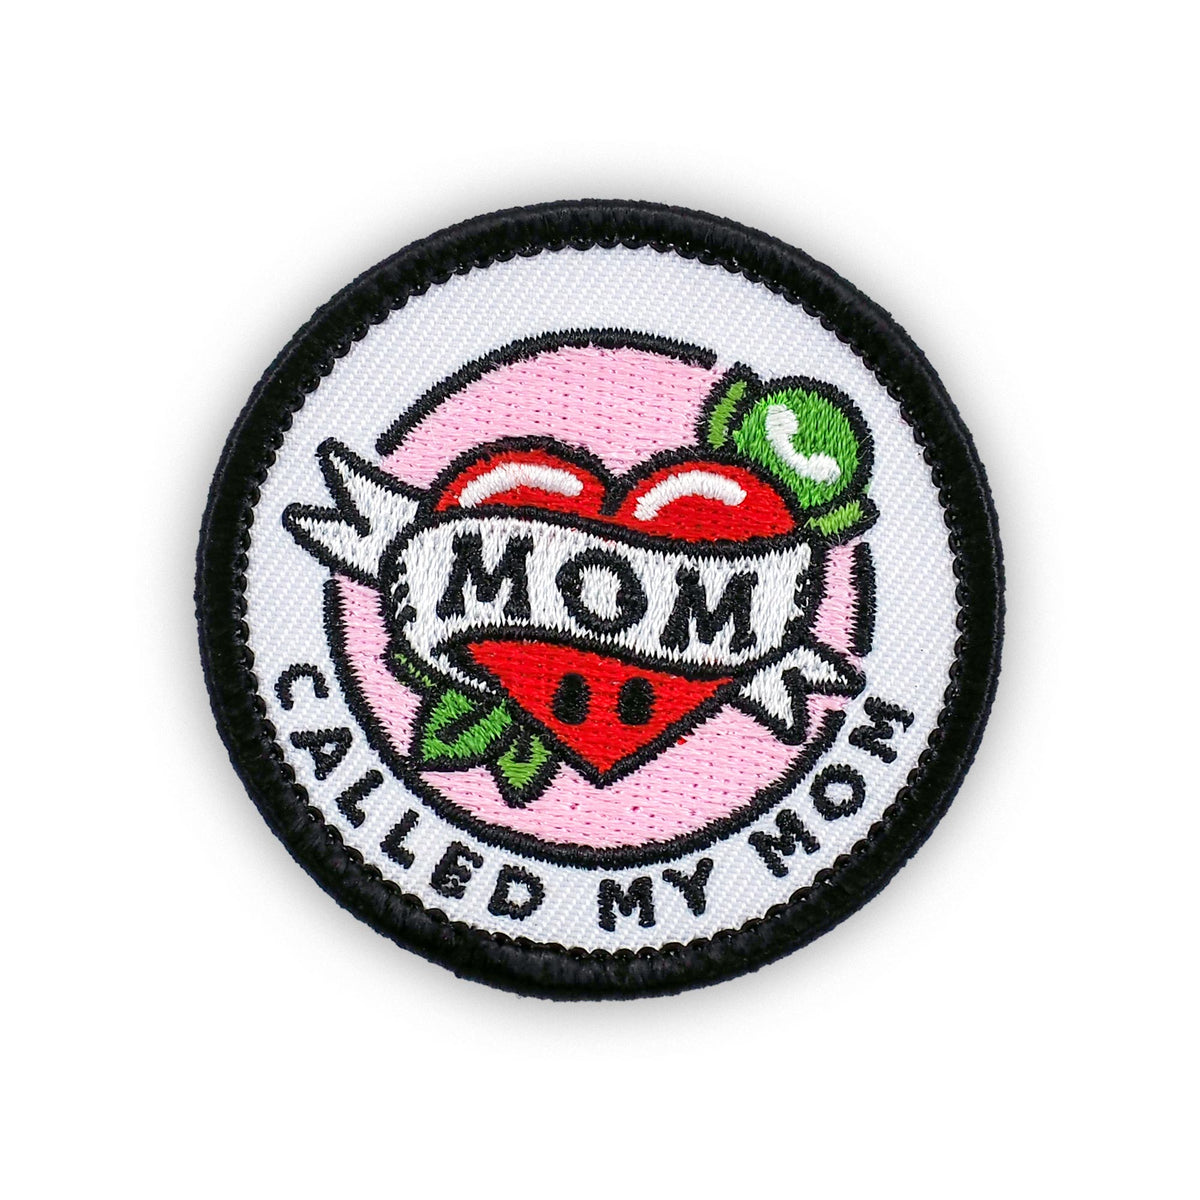 Called My Mom adulting merit badge patch for adults